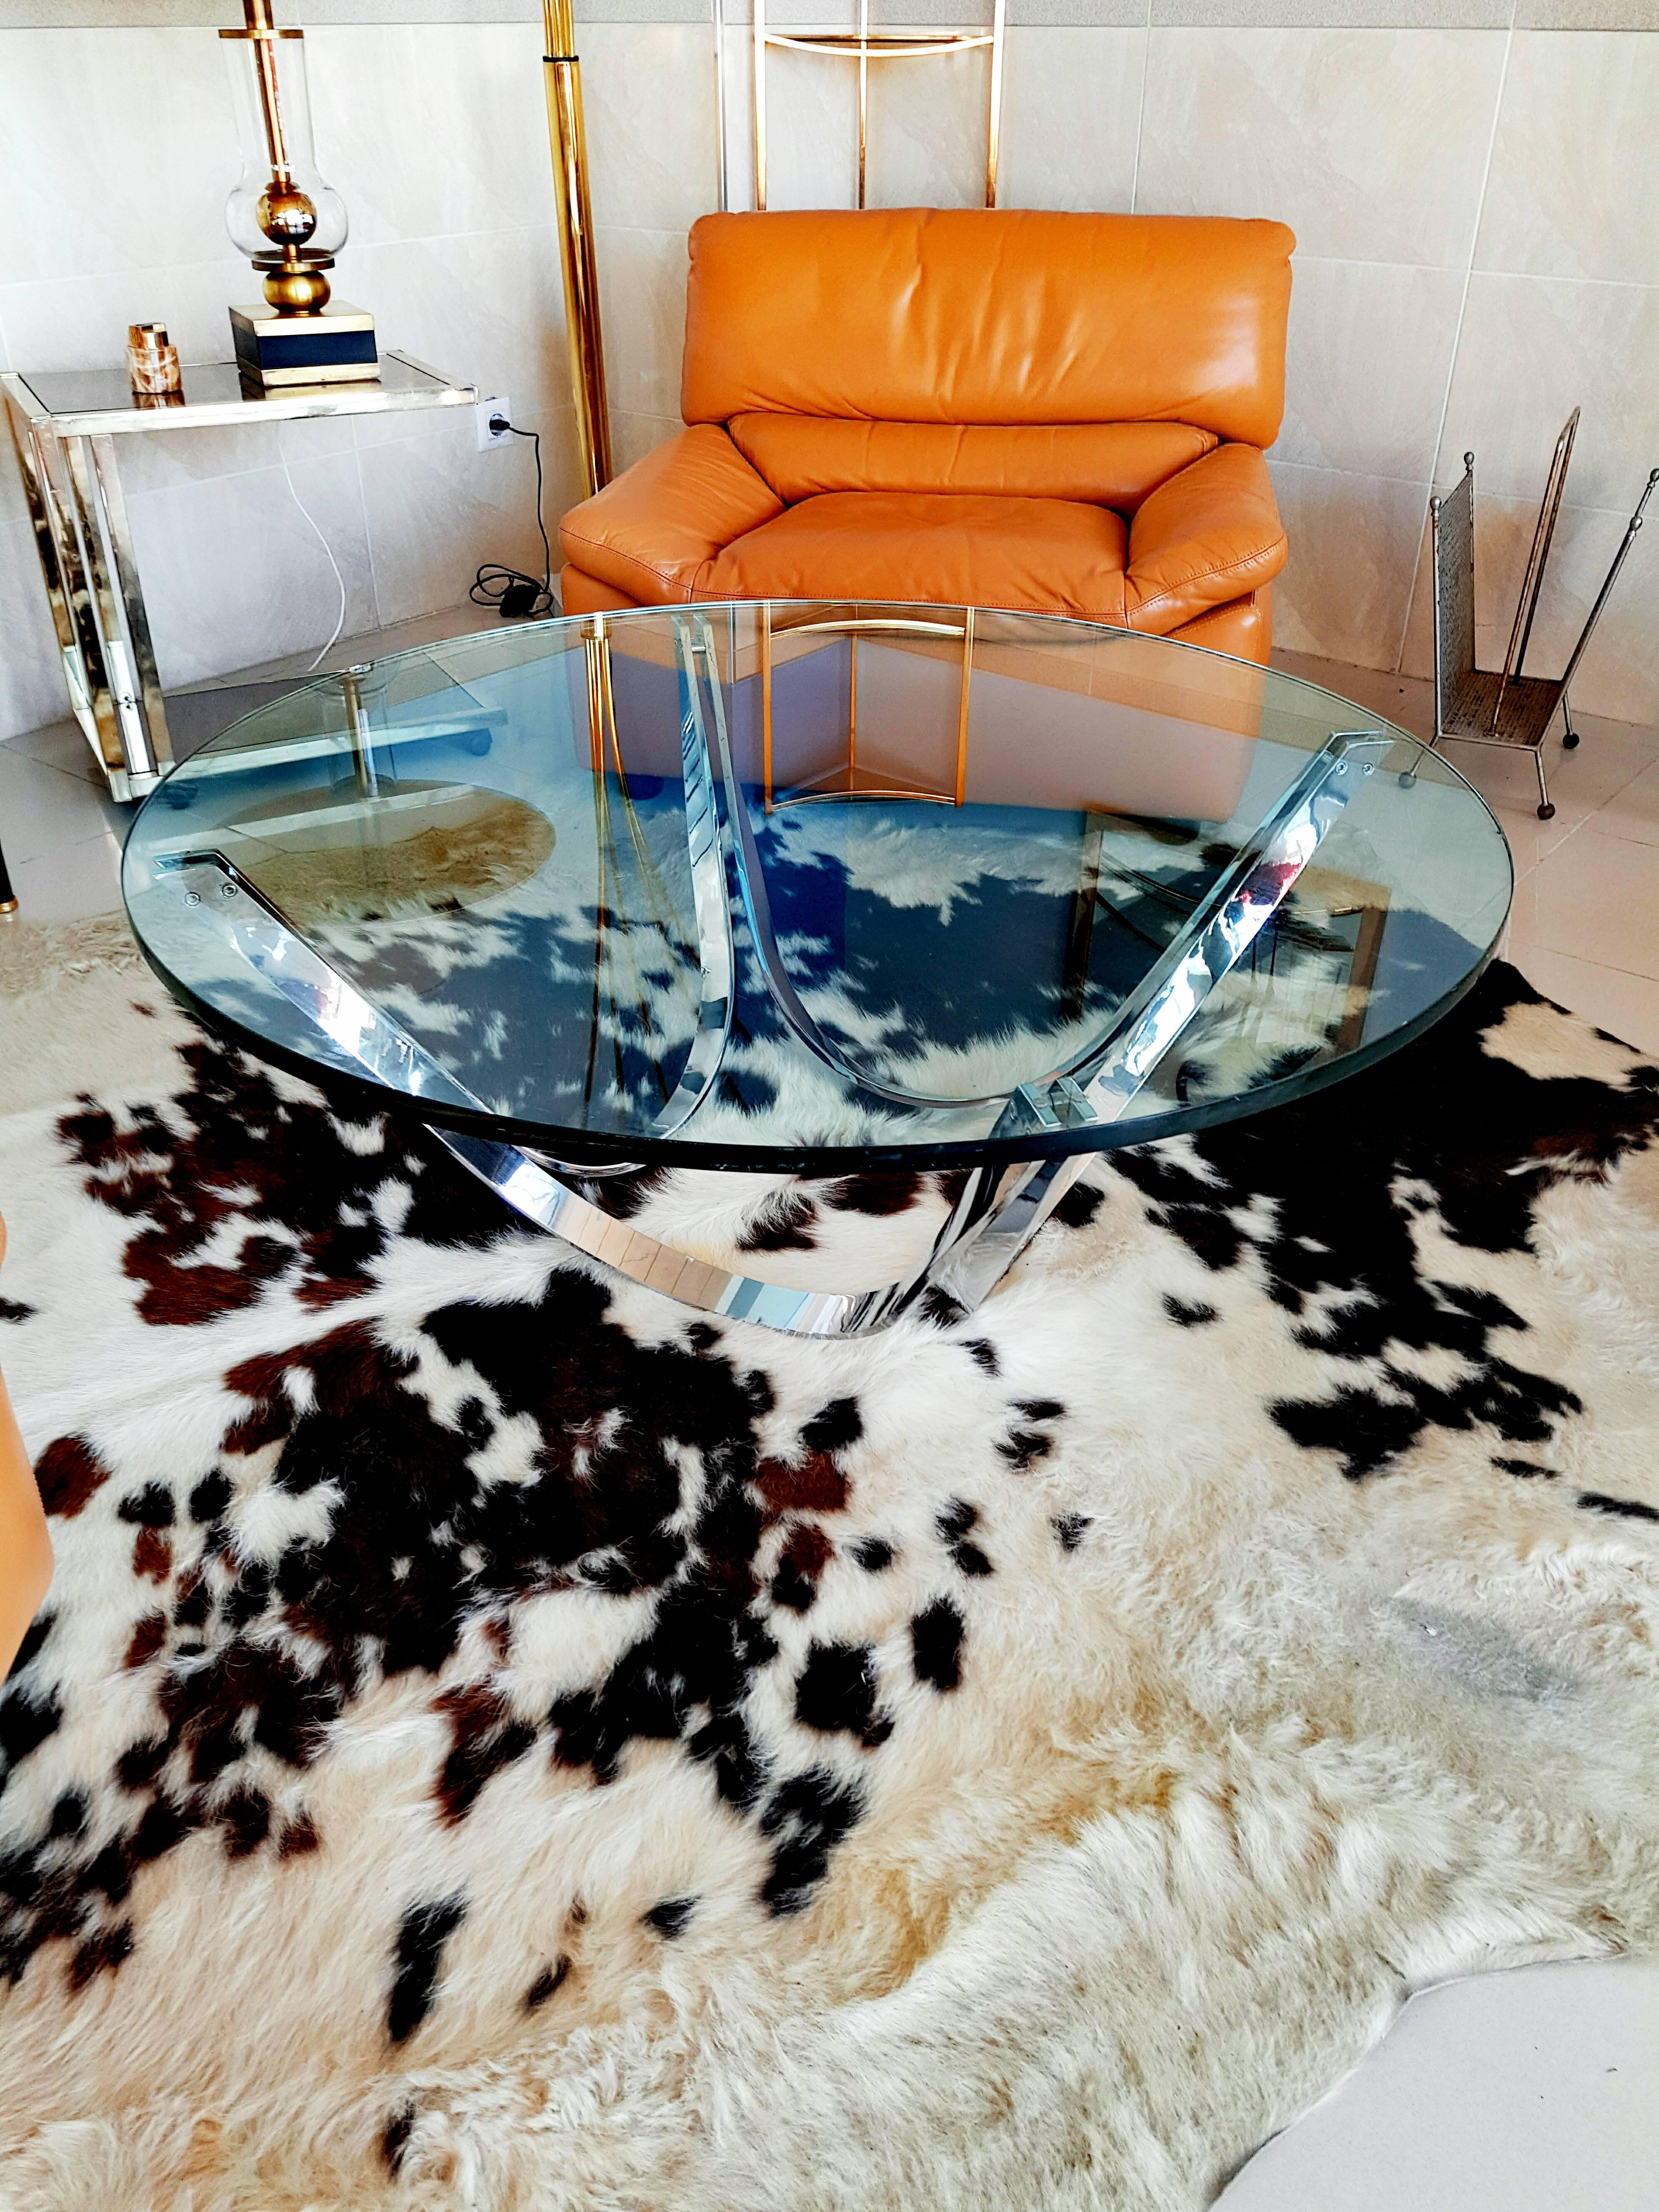 20th Century Roger Sprunger Chrome and Glass Coffee Table by Dunbar Furniture 1970s